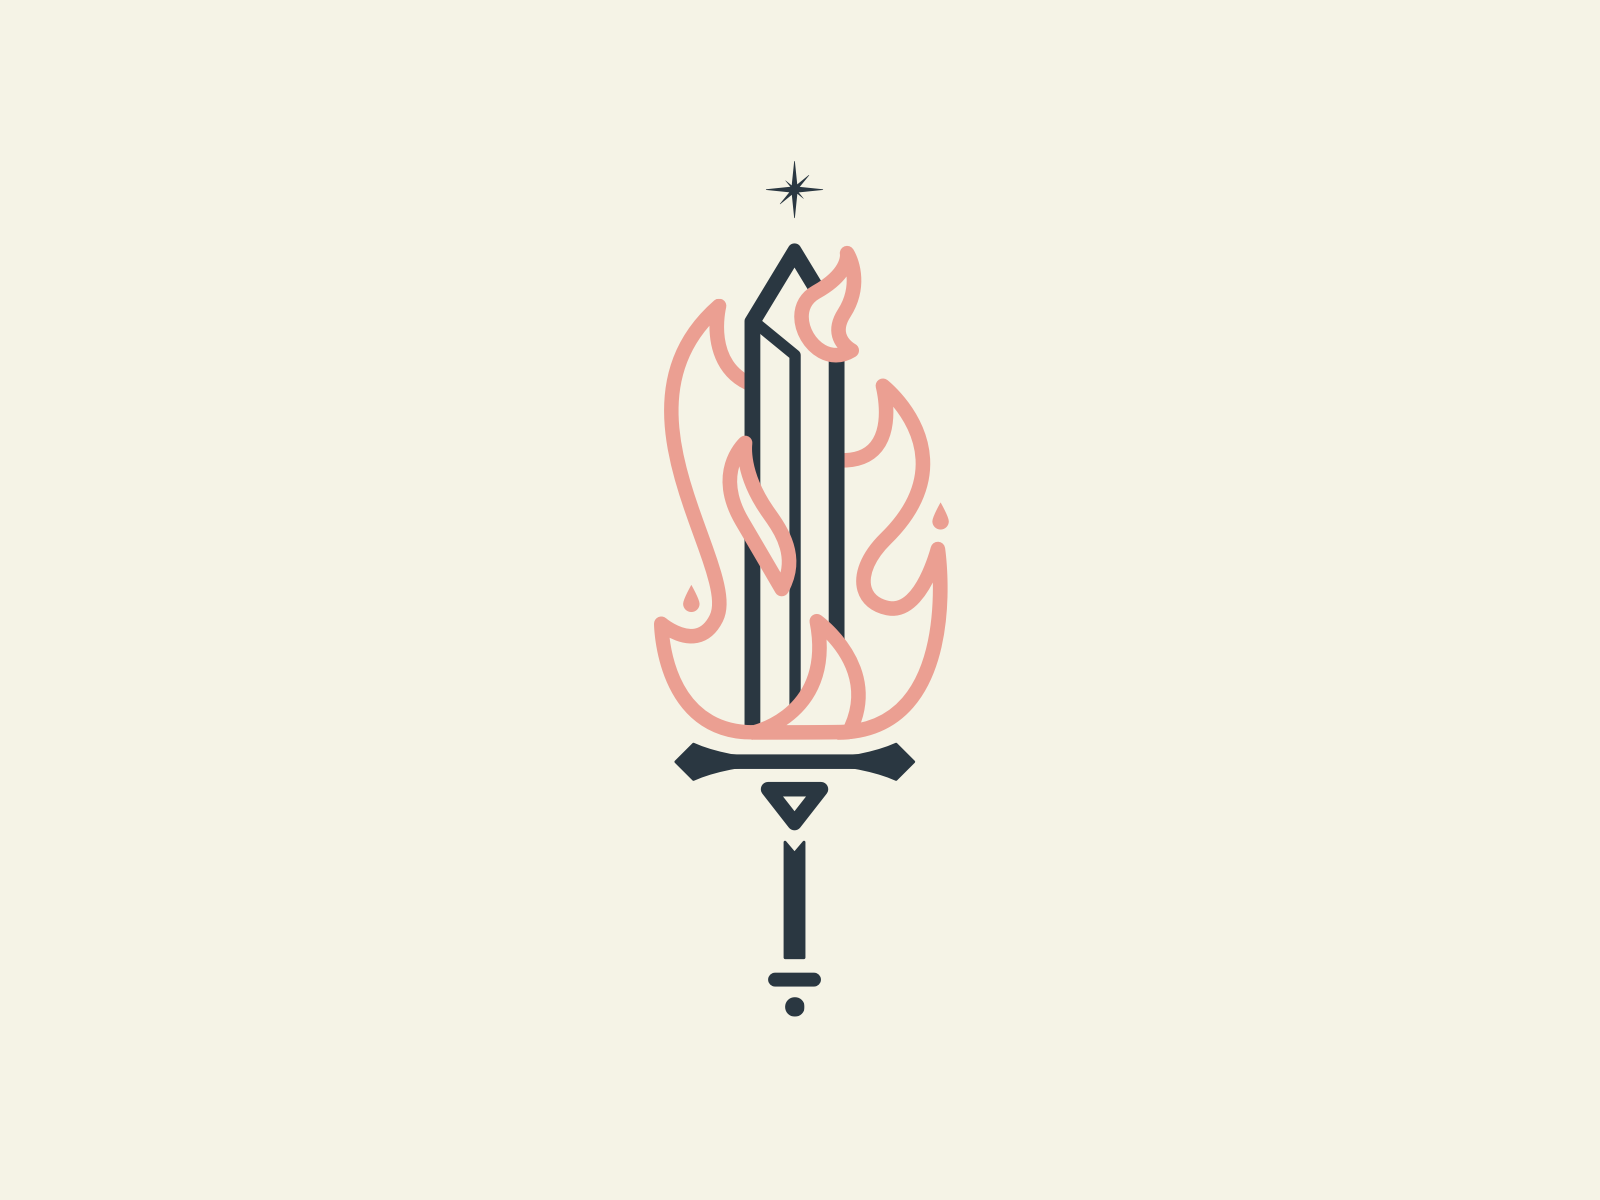 Sword of the Spirit by Micah Lanier on Dribbble